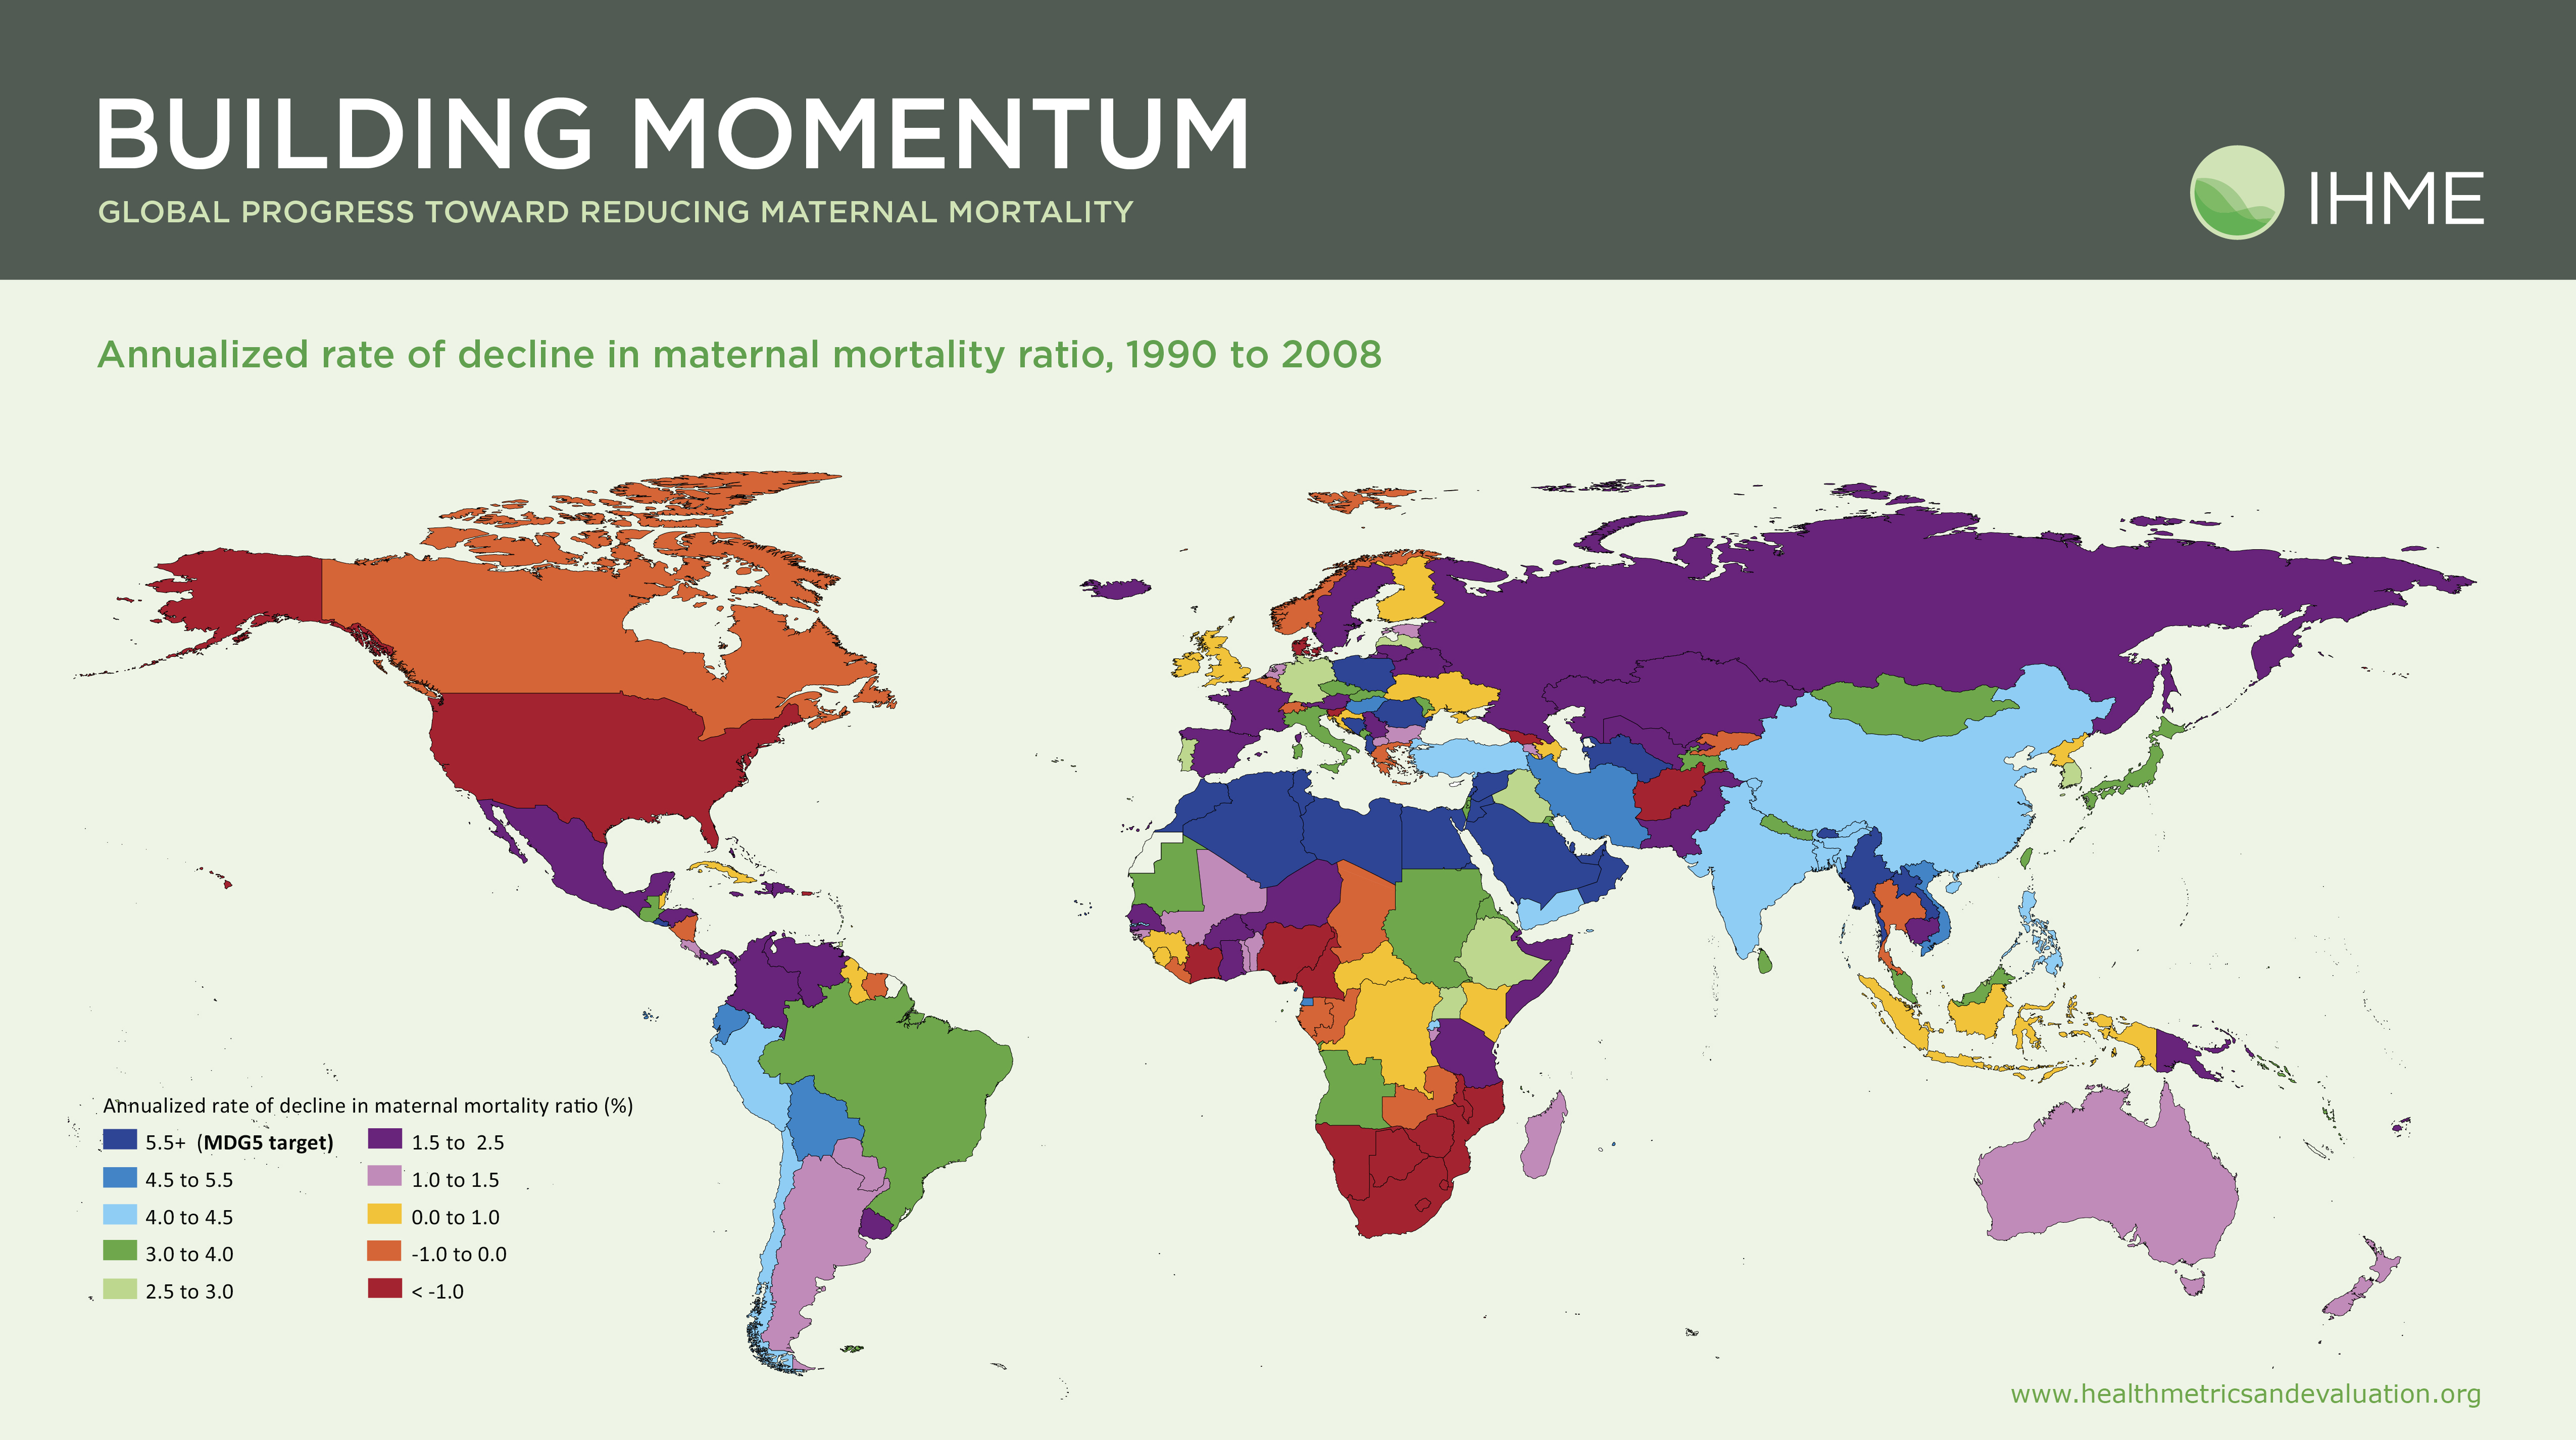 Annualized rate of decline in maternal mortality (Global), 1990-2008